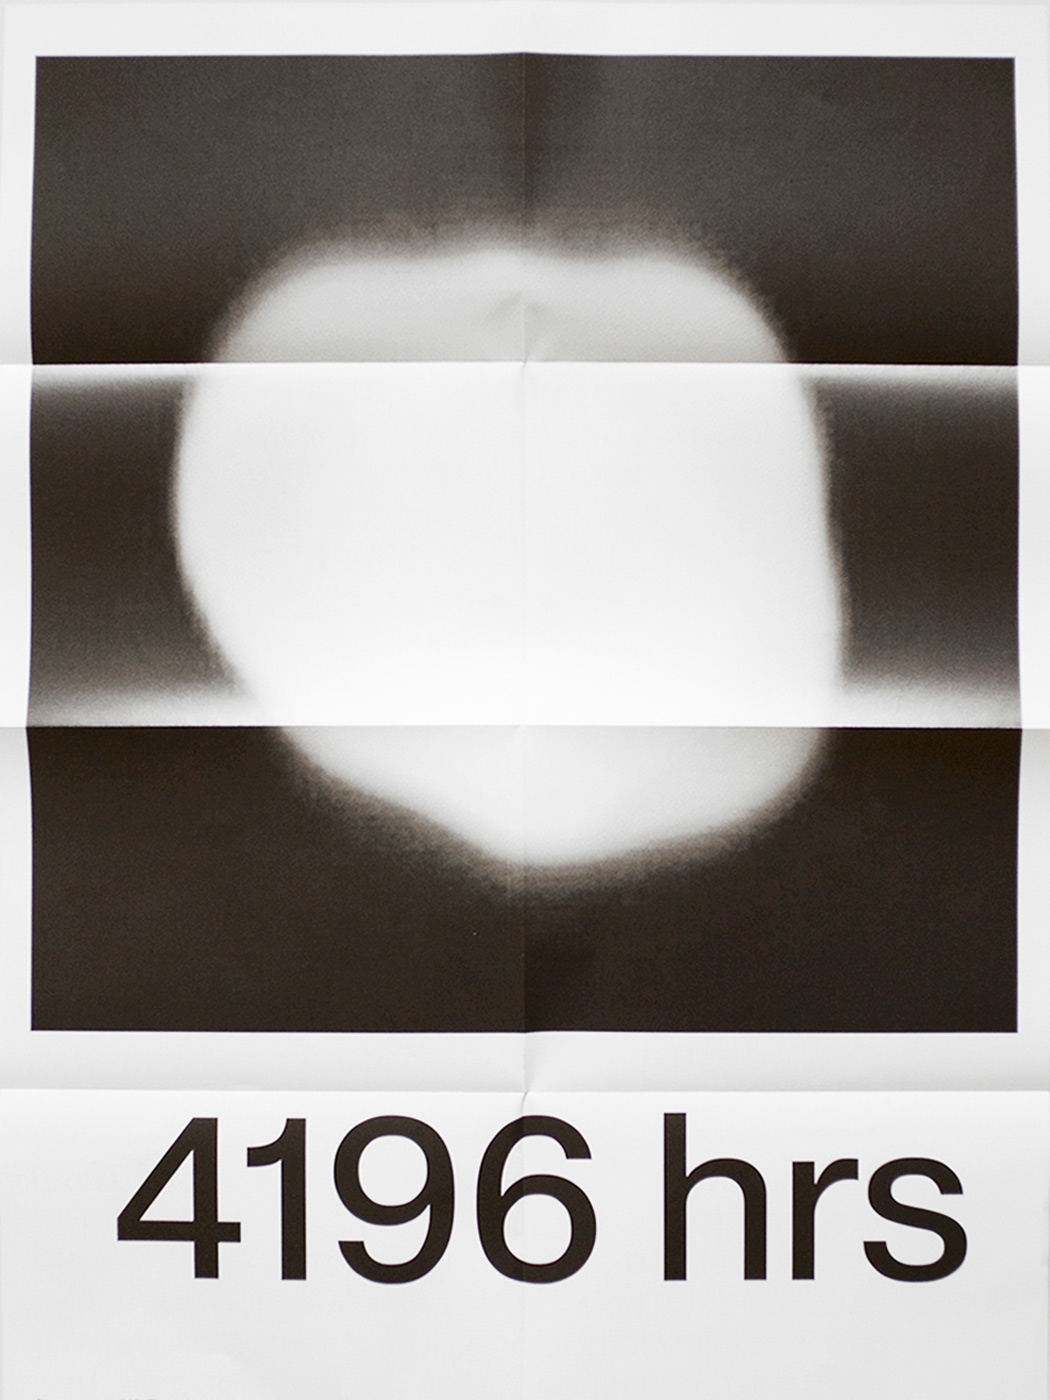 A poster image of the asteroid 16psyche, with the sans serif inscription 4196hrs below.